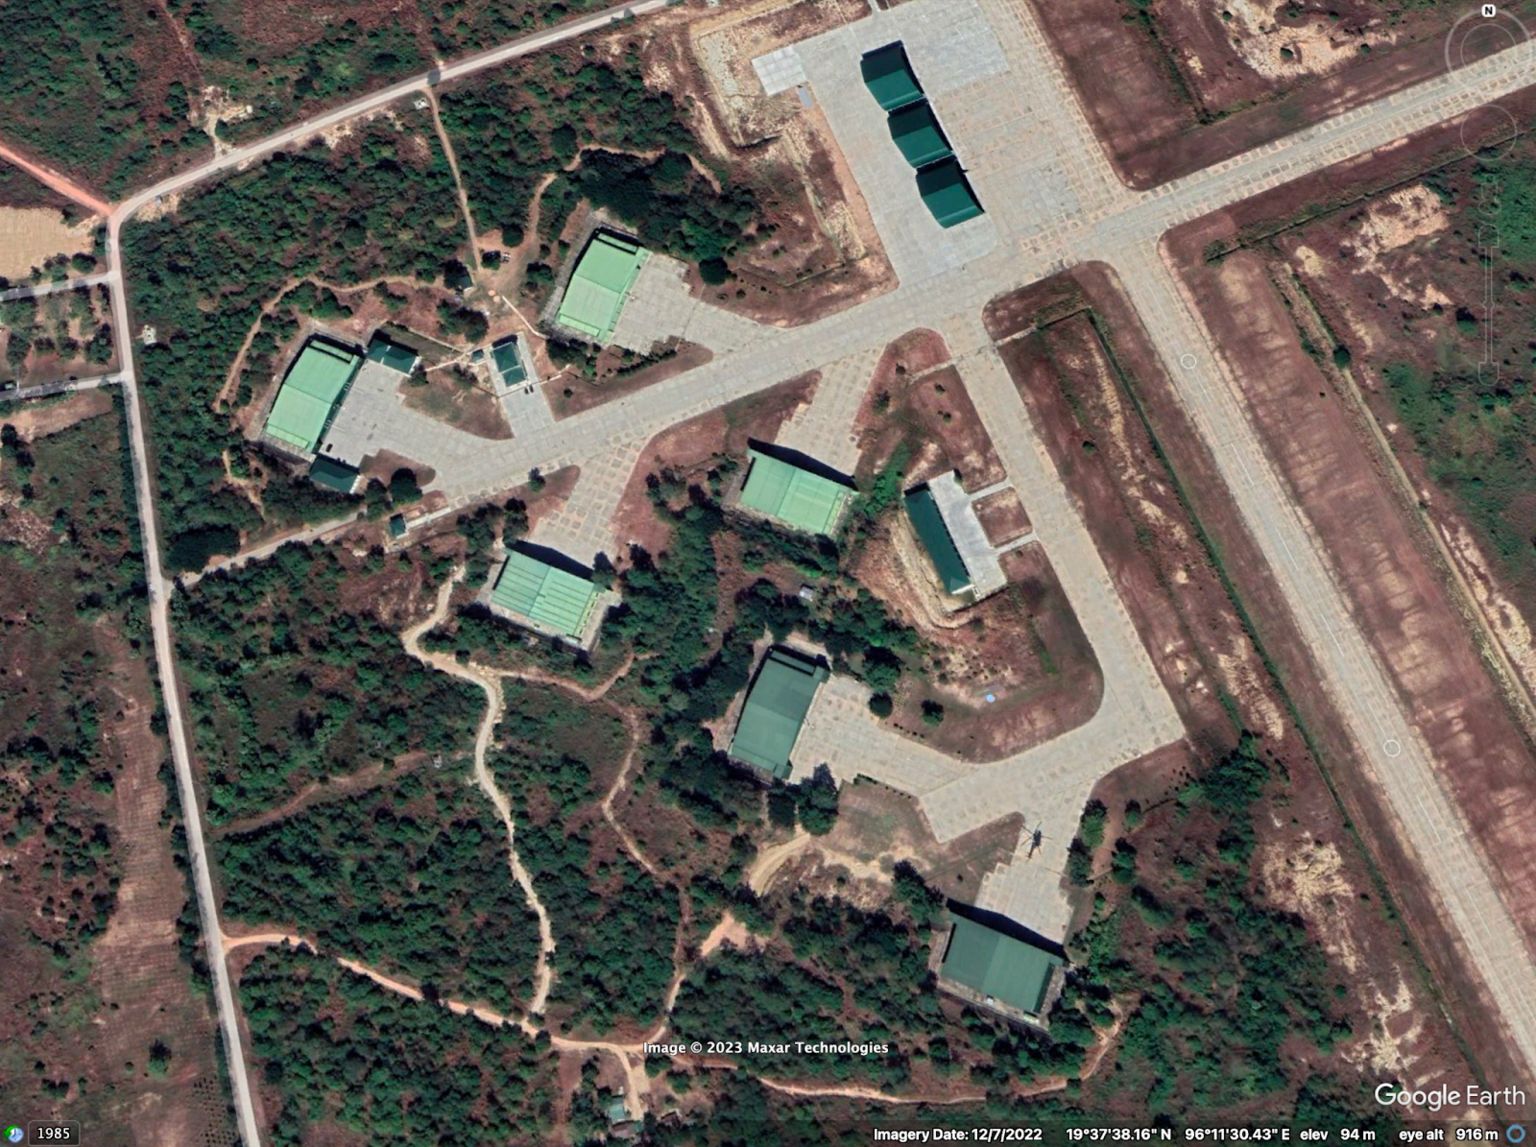 Satellite image of the sheds build for the Su-30 M's